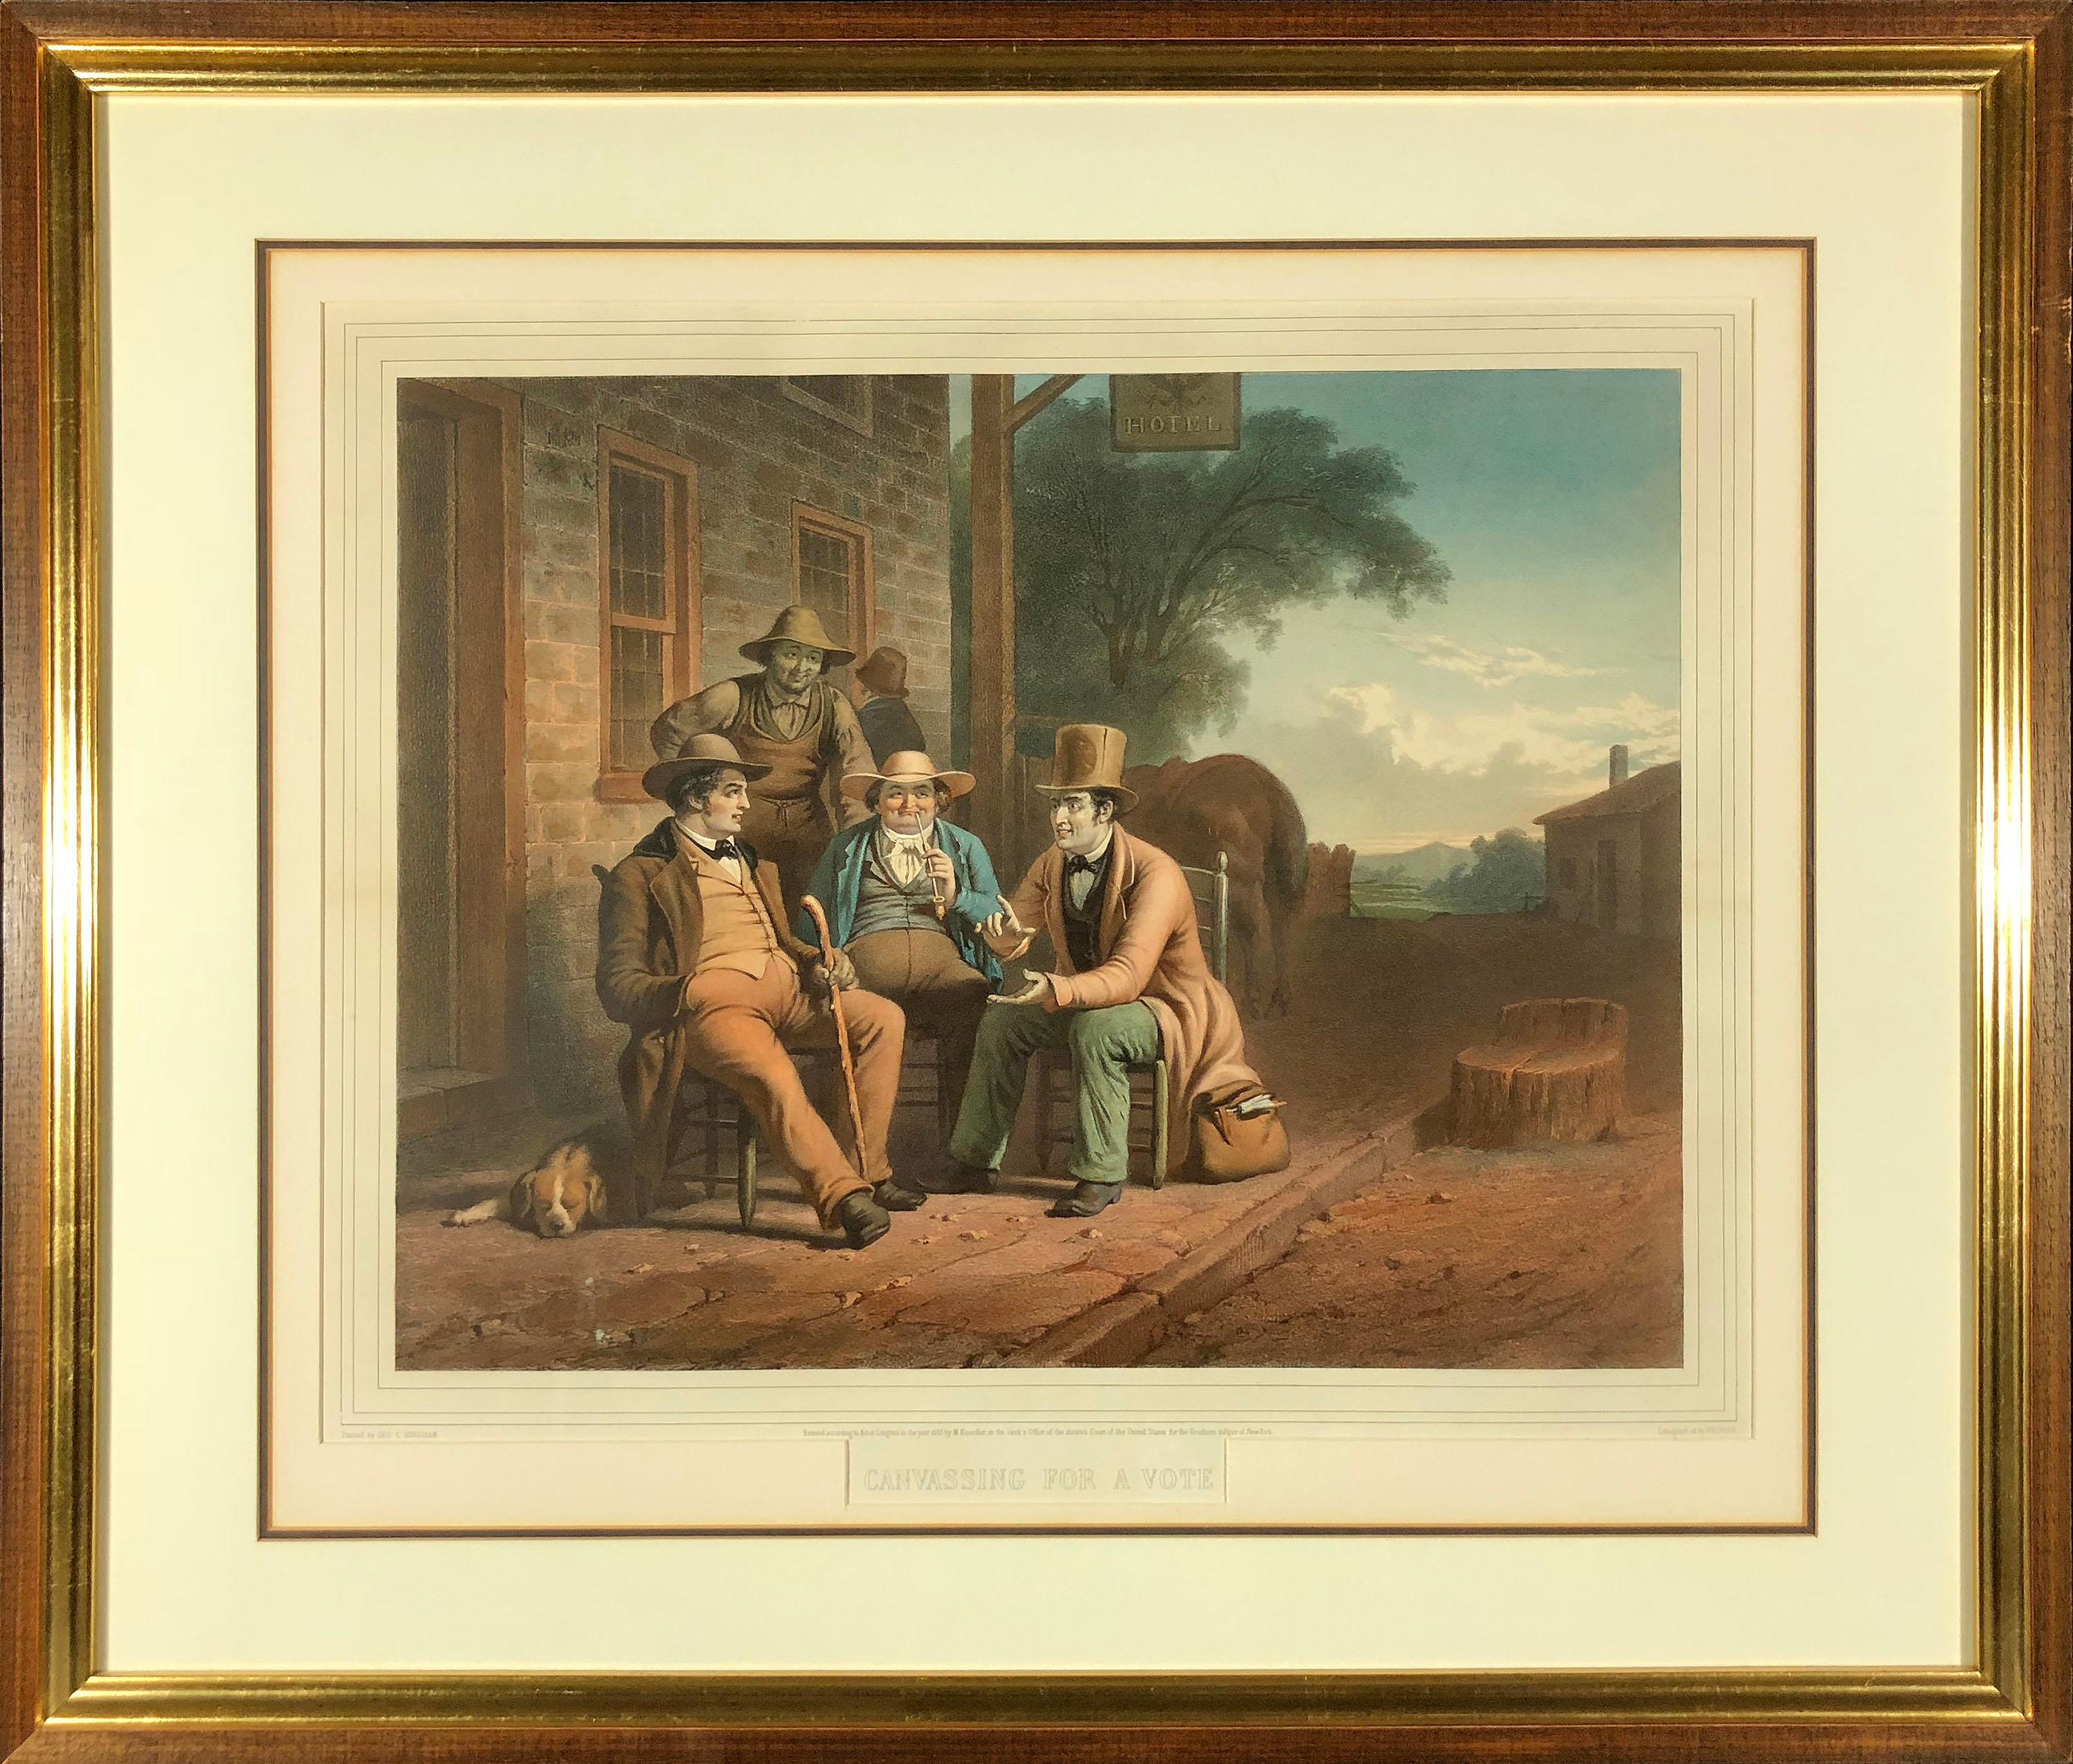 Canvassing for a Vote - Print by George Caleb Bingham